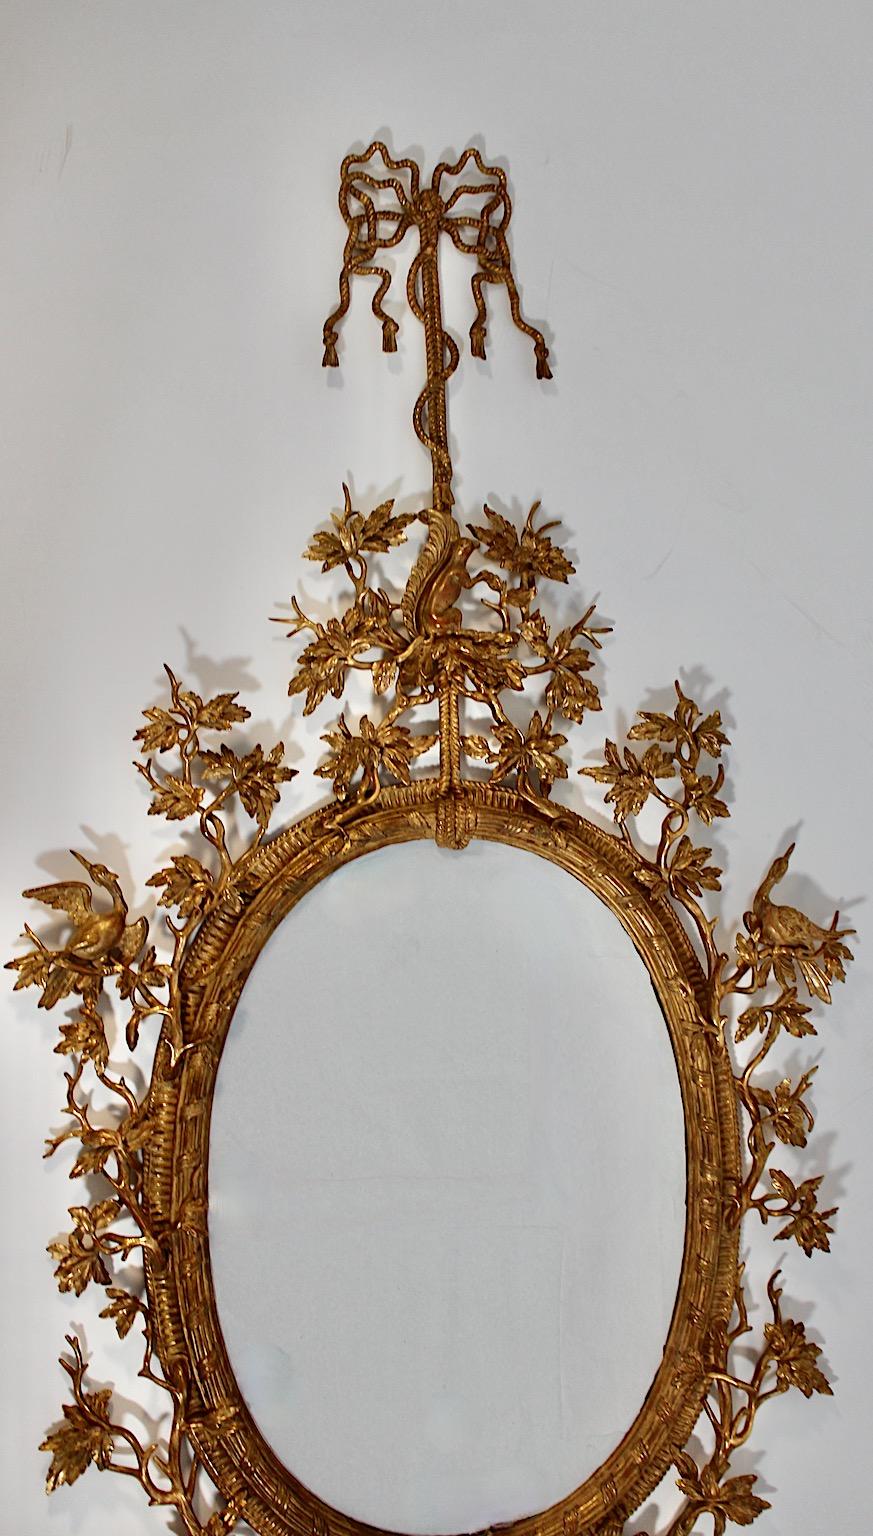 Austrian Antique Authentic Gilt Carved Wood Wall Mirror Style Thomas Johnson circa 1830 For Sale